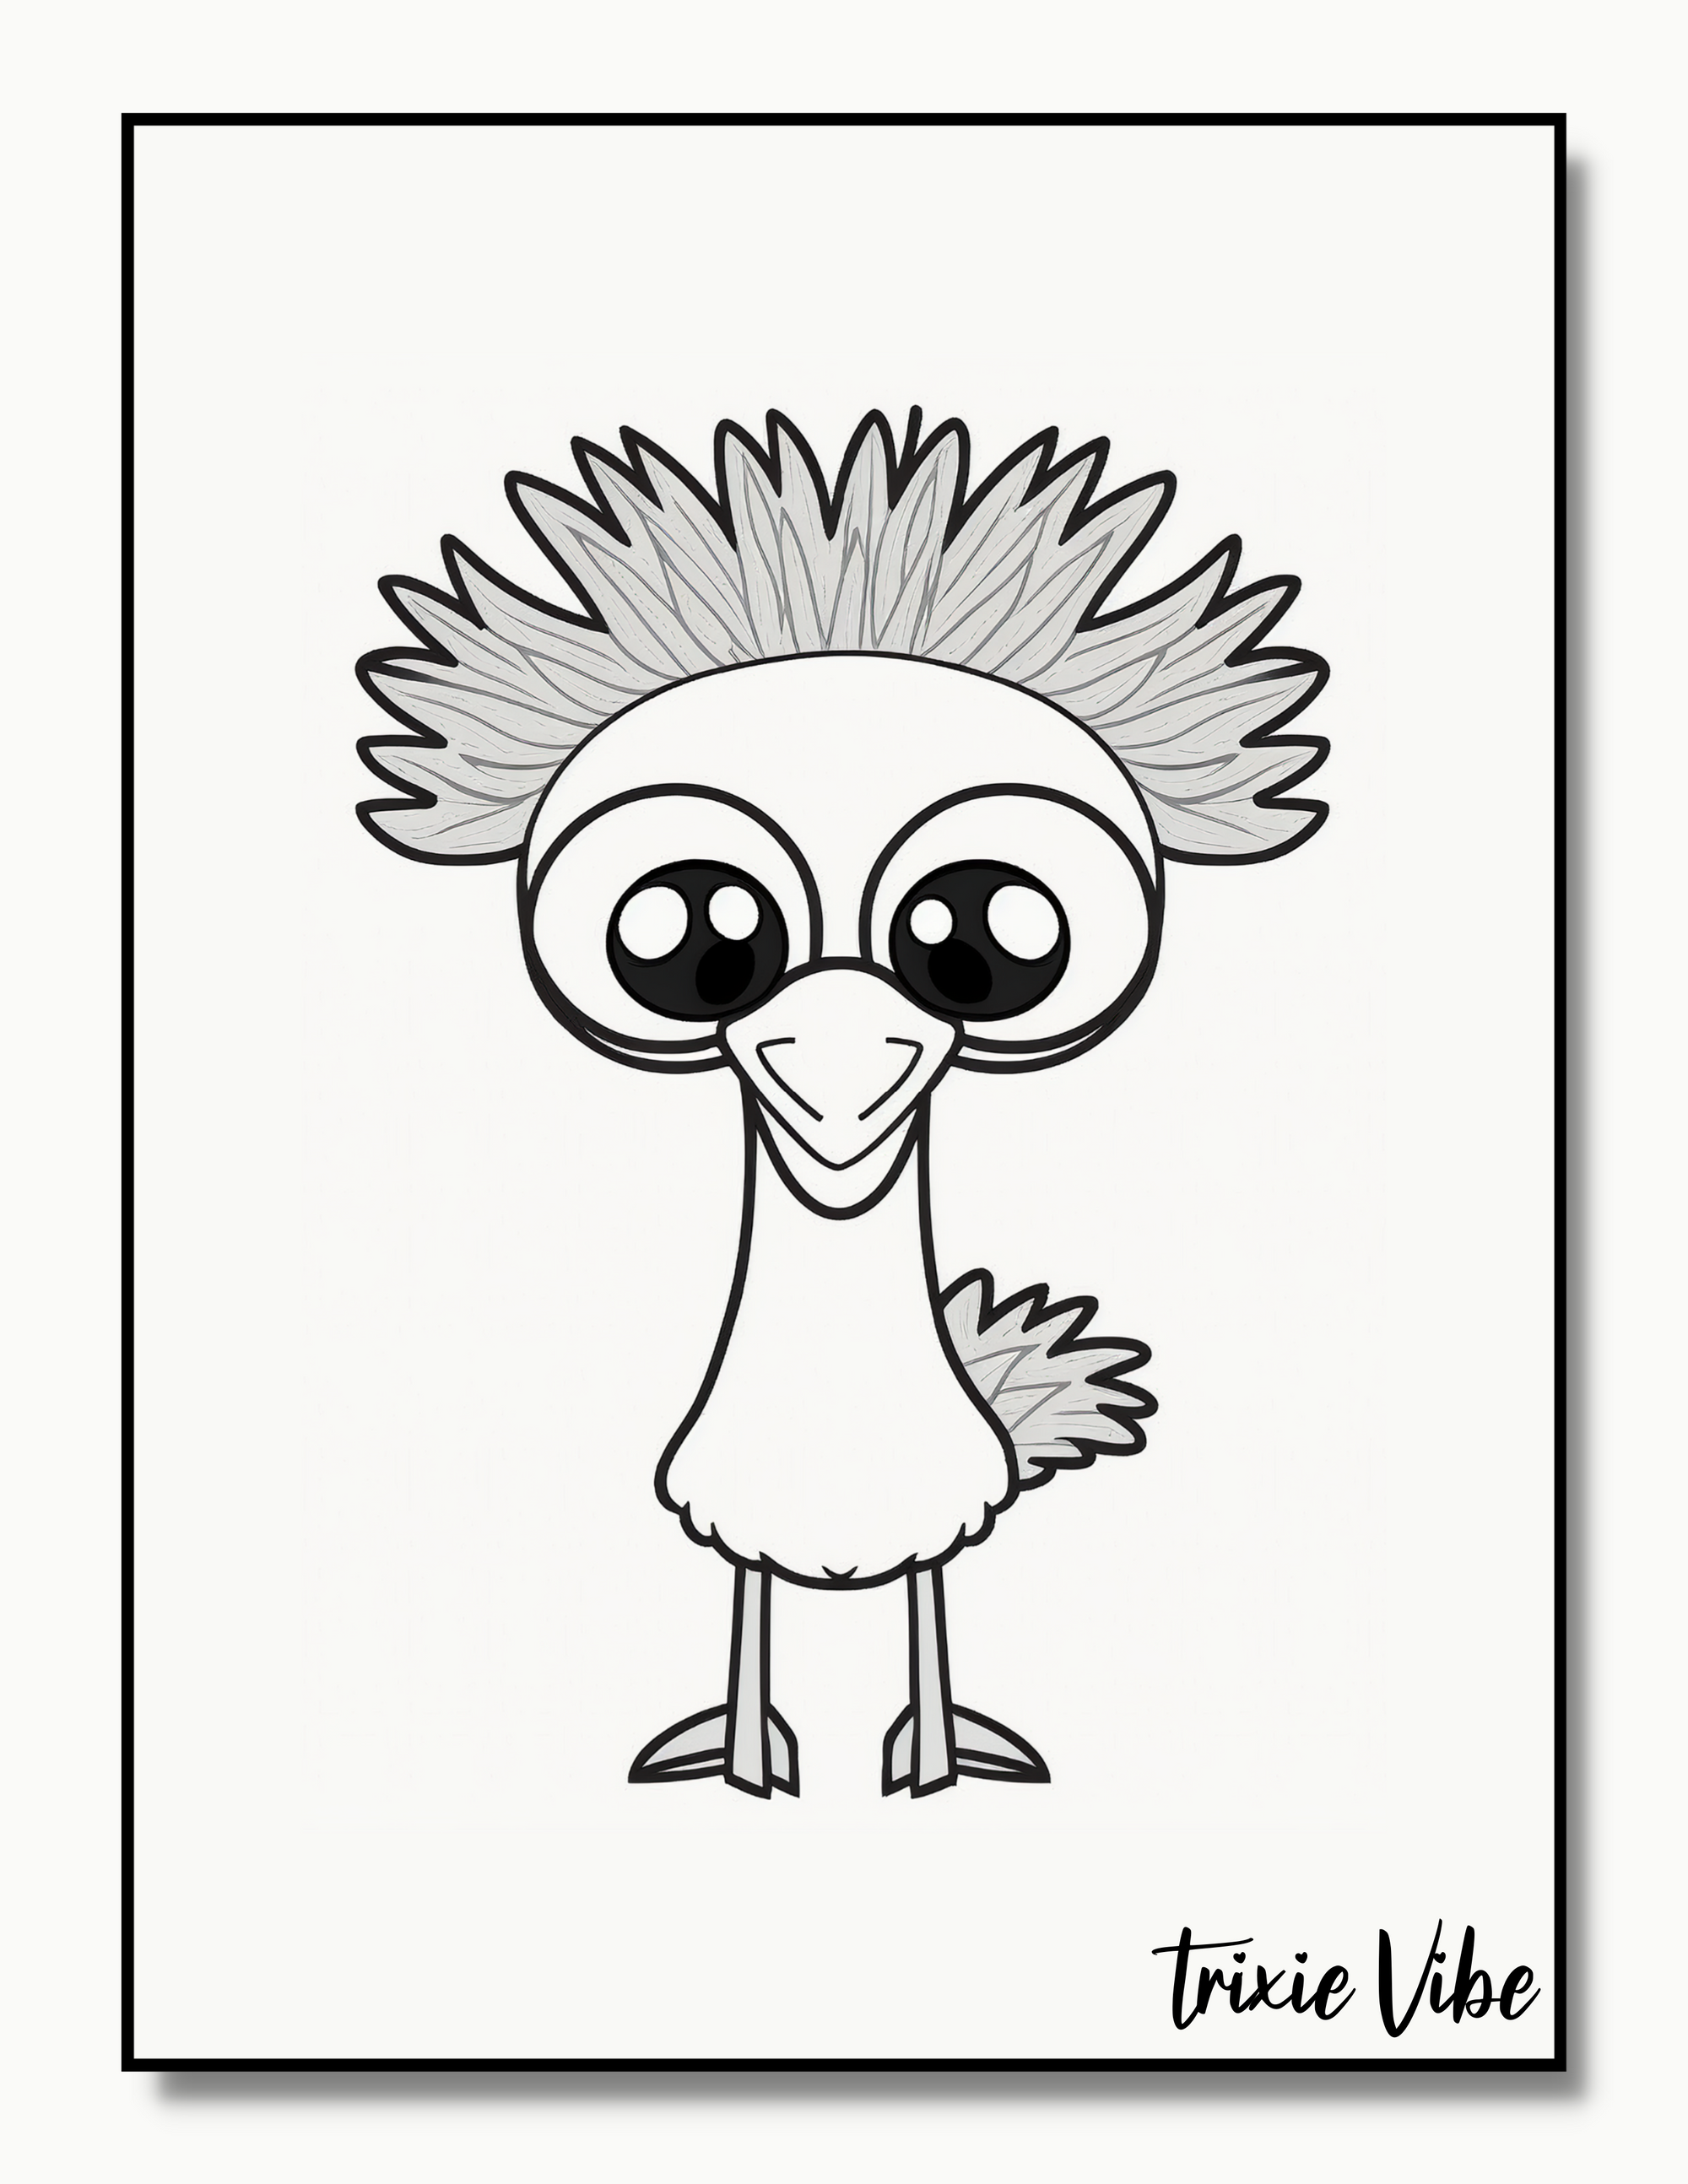 Emu Coloring Pages